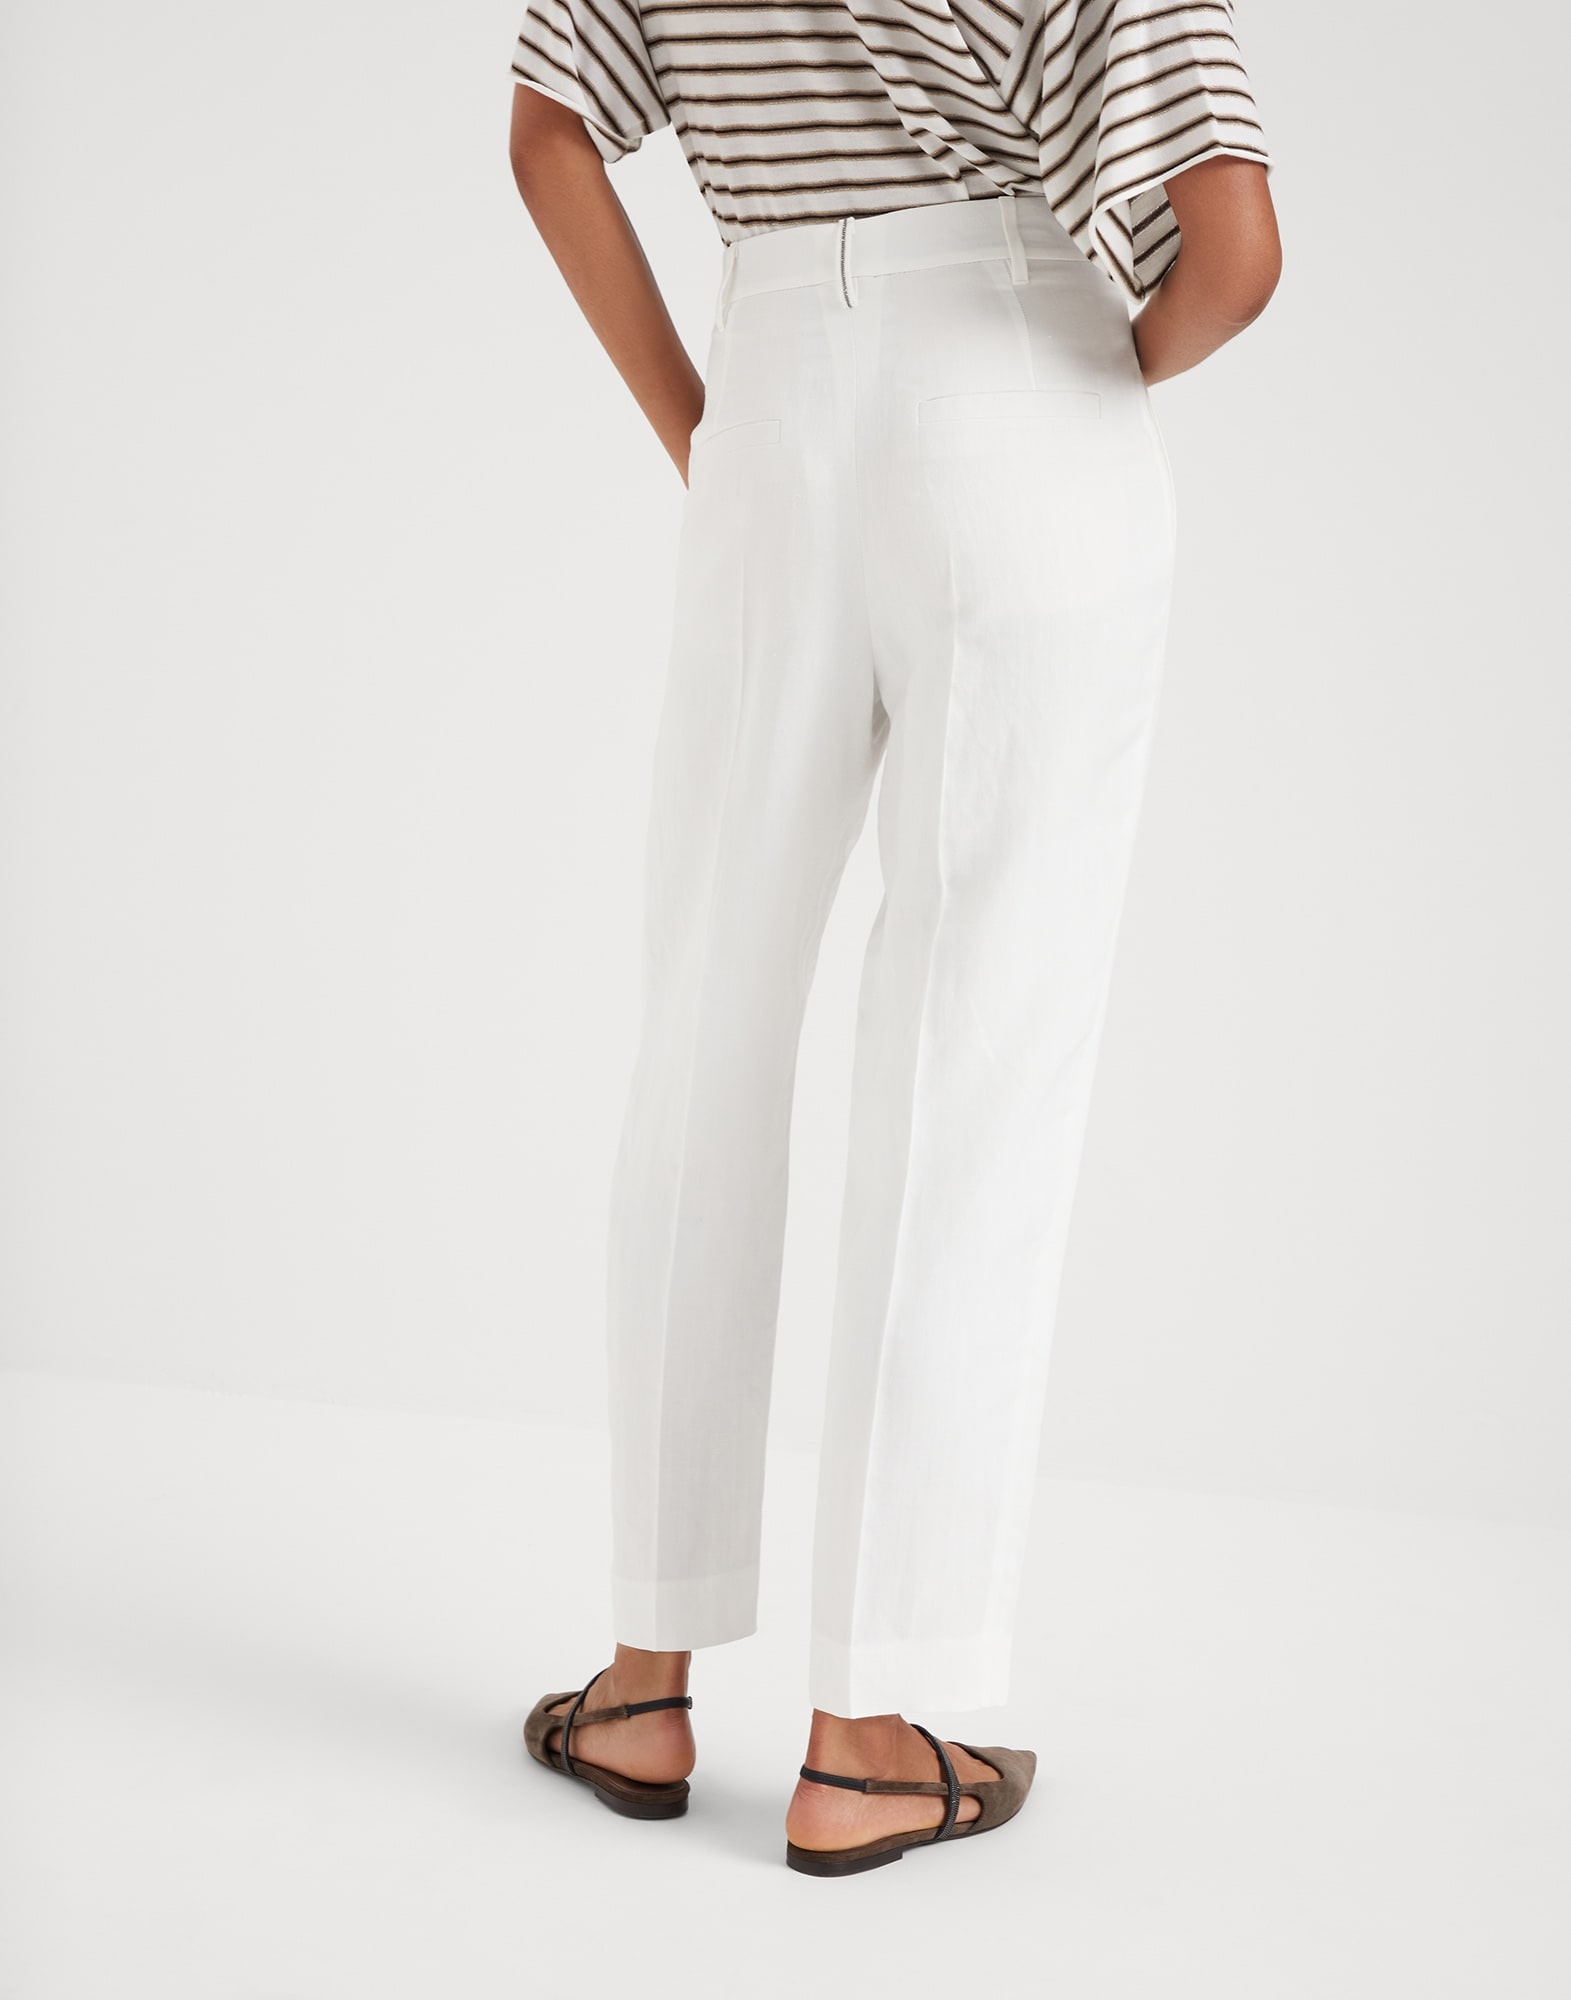 Viscose and linen fluid twill slouchy trousers with monili - 2